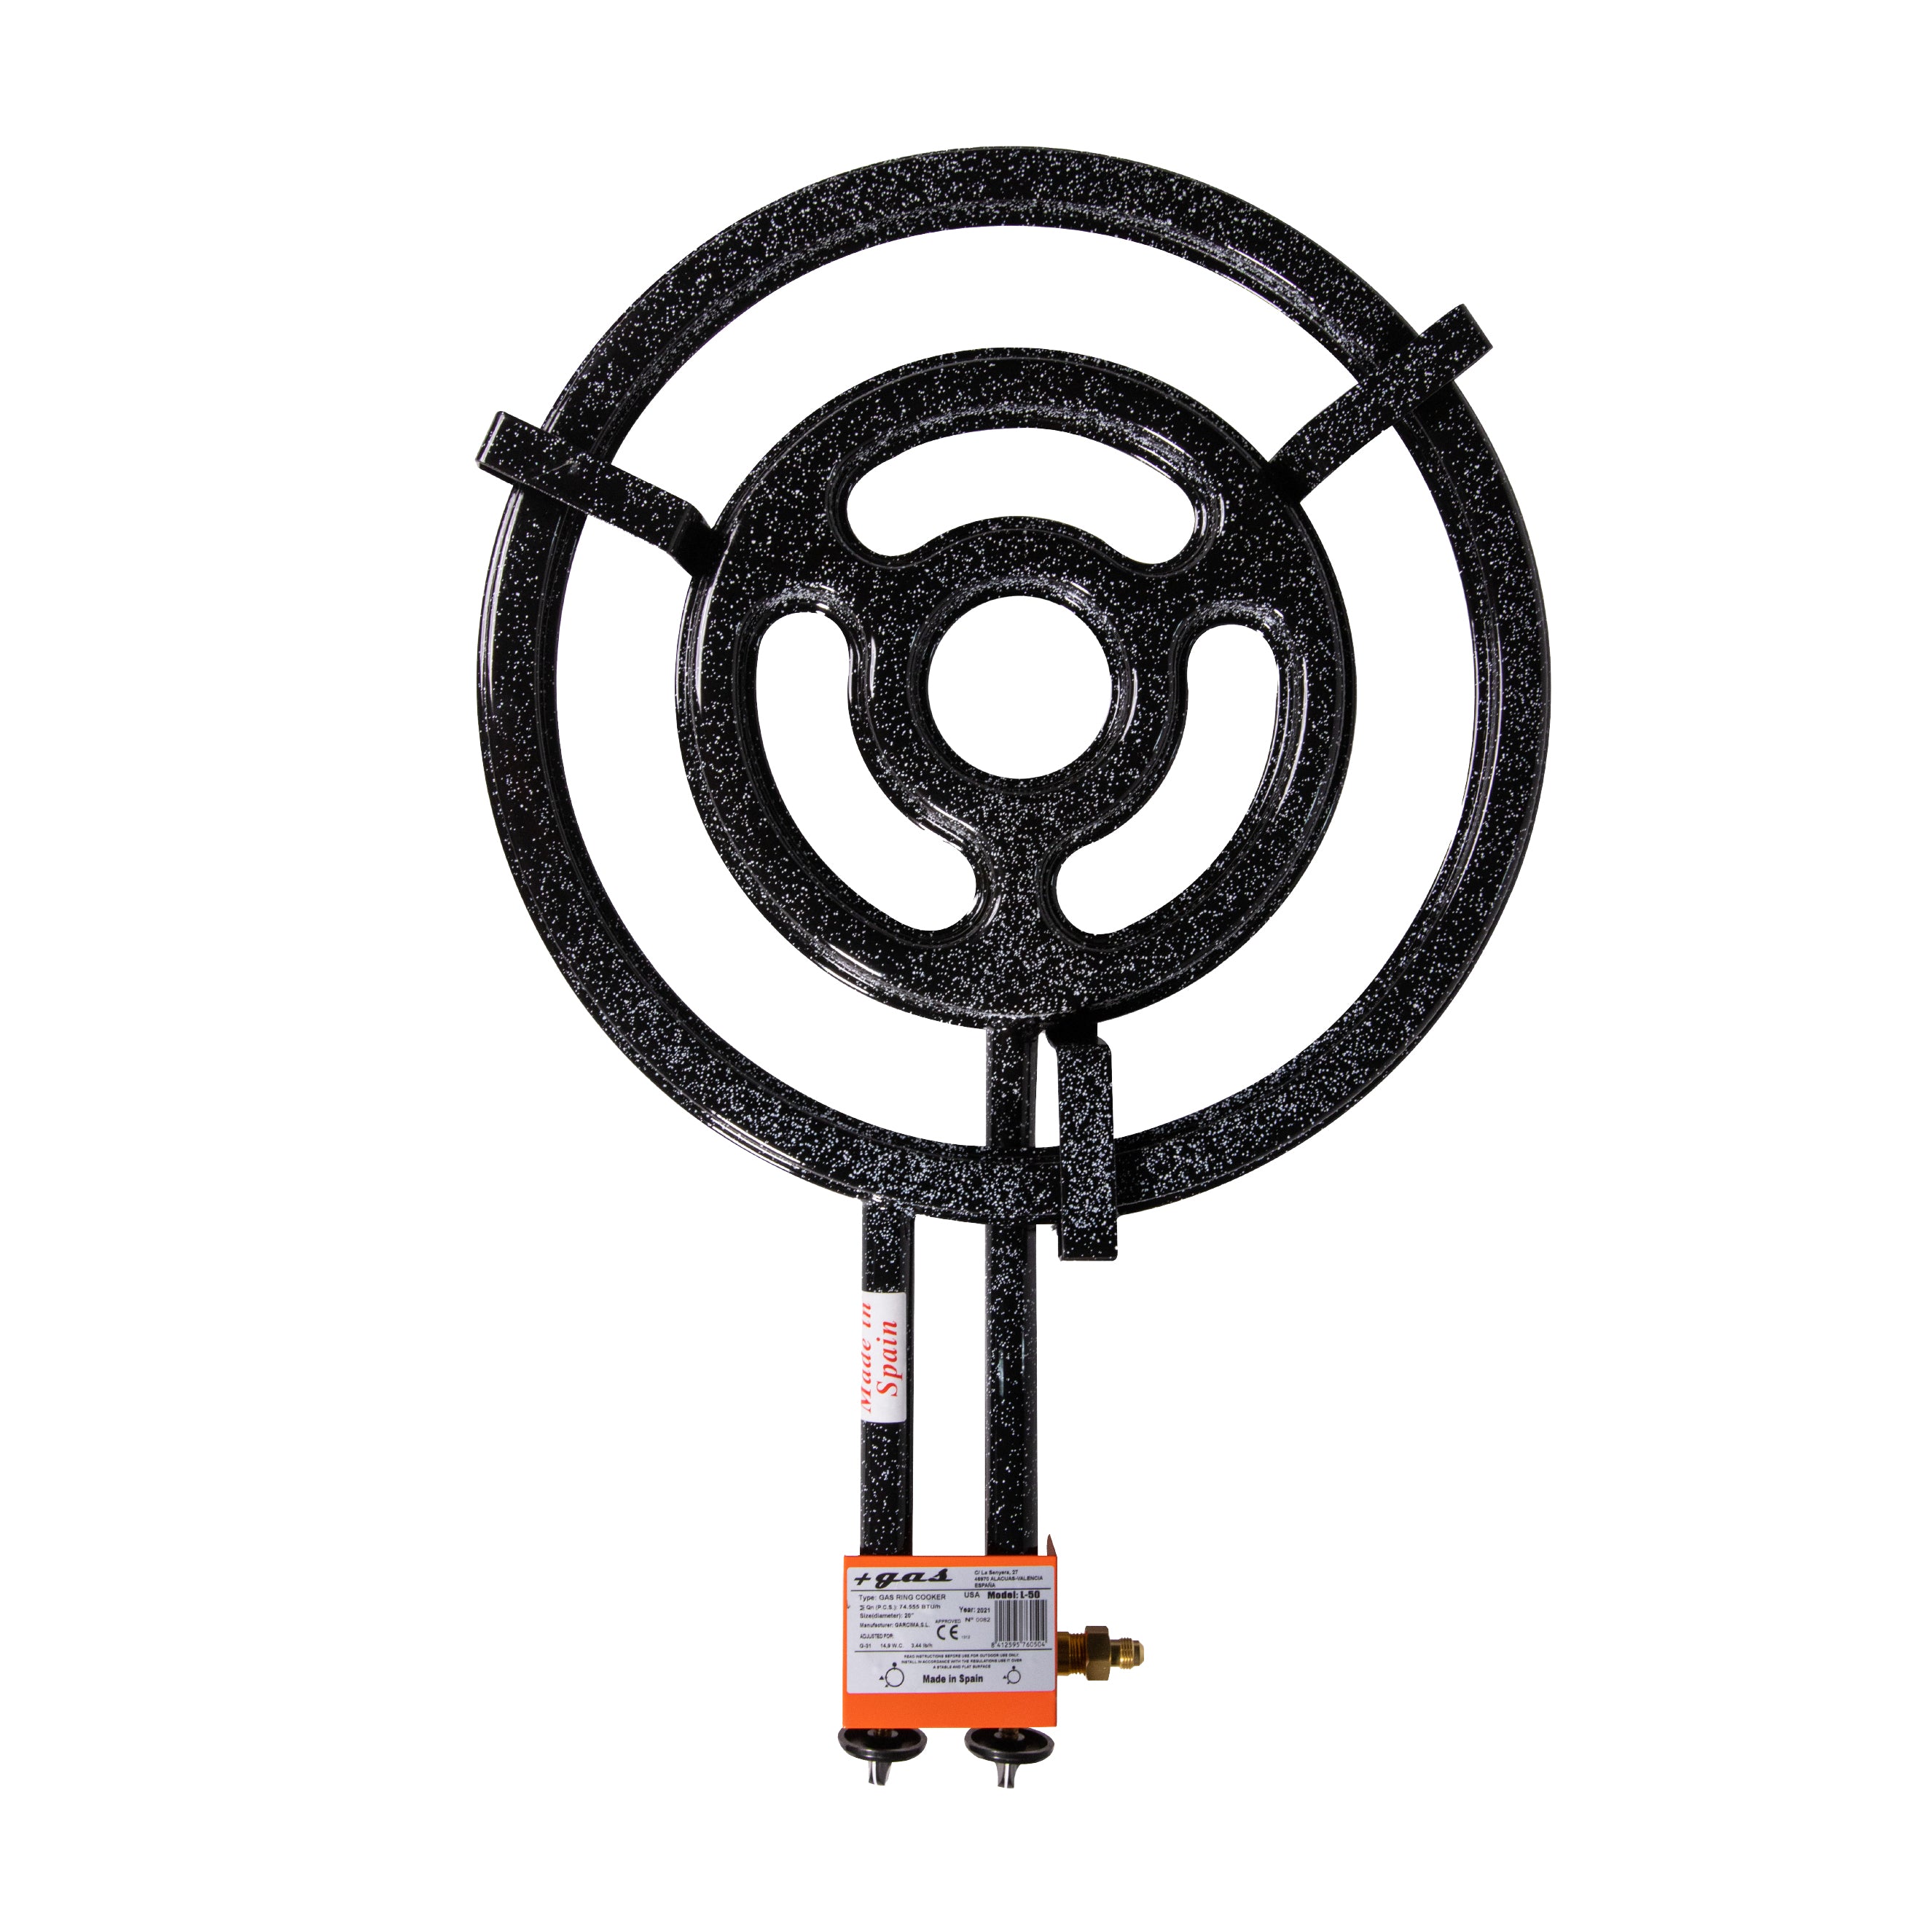 3 Rings Propane Burner for Outdoors | Professional Paella Pan Burner | Fits up to 32 Inches Pans